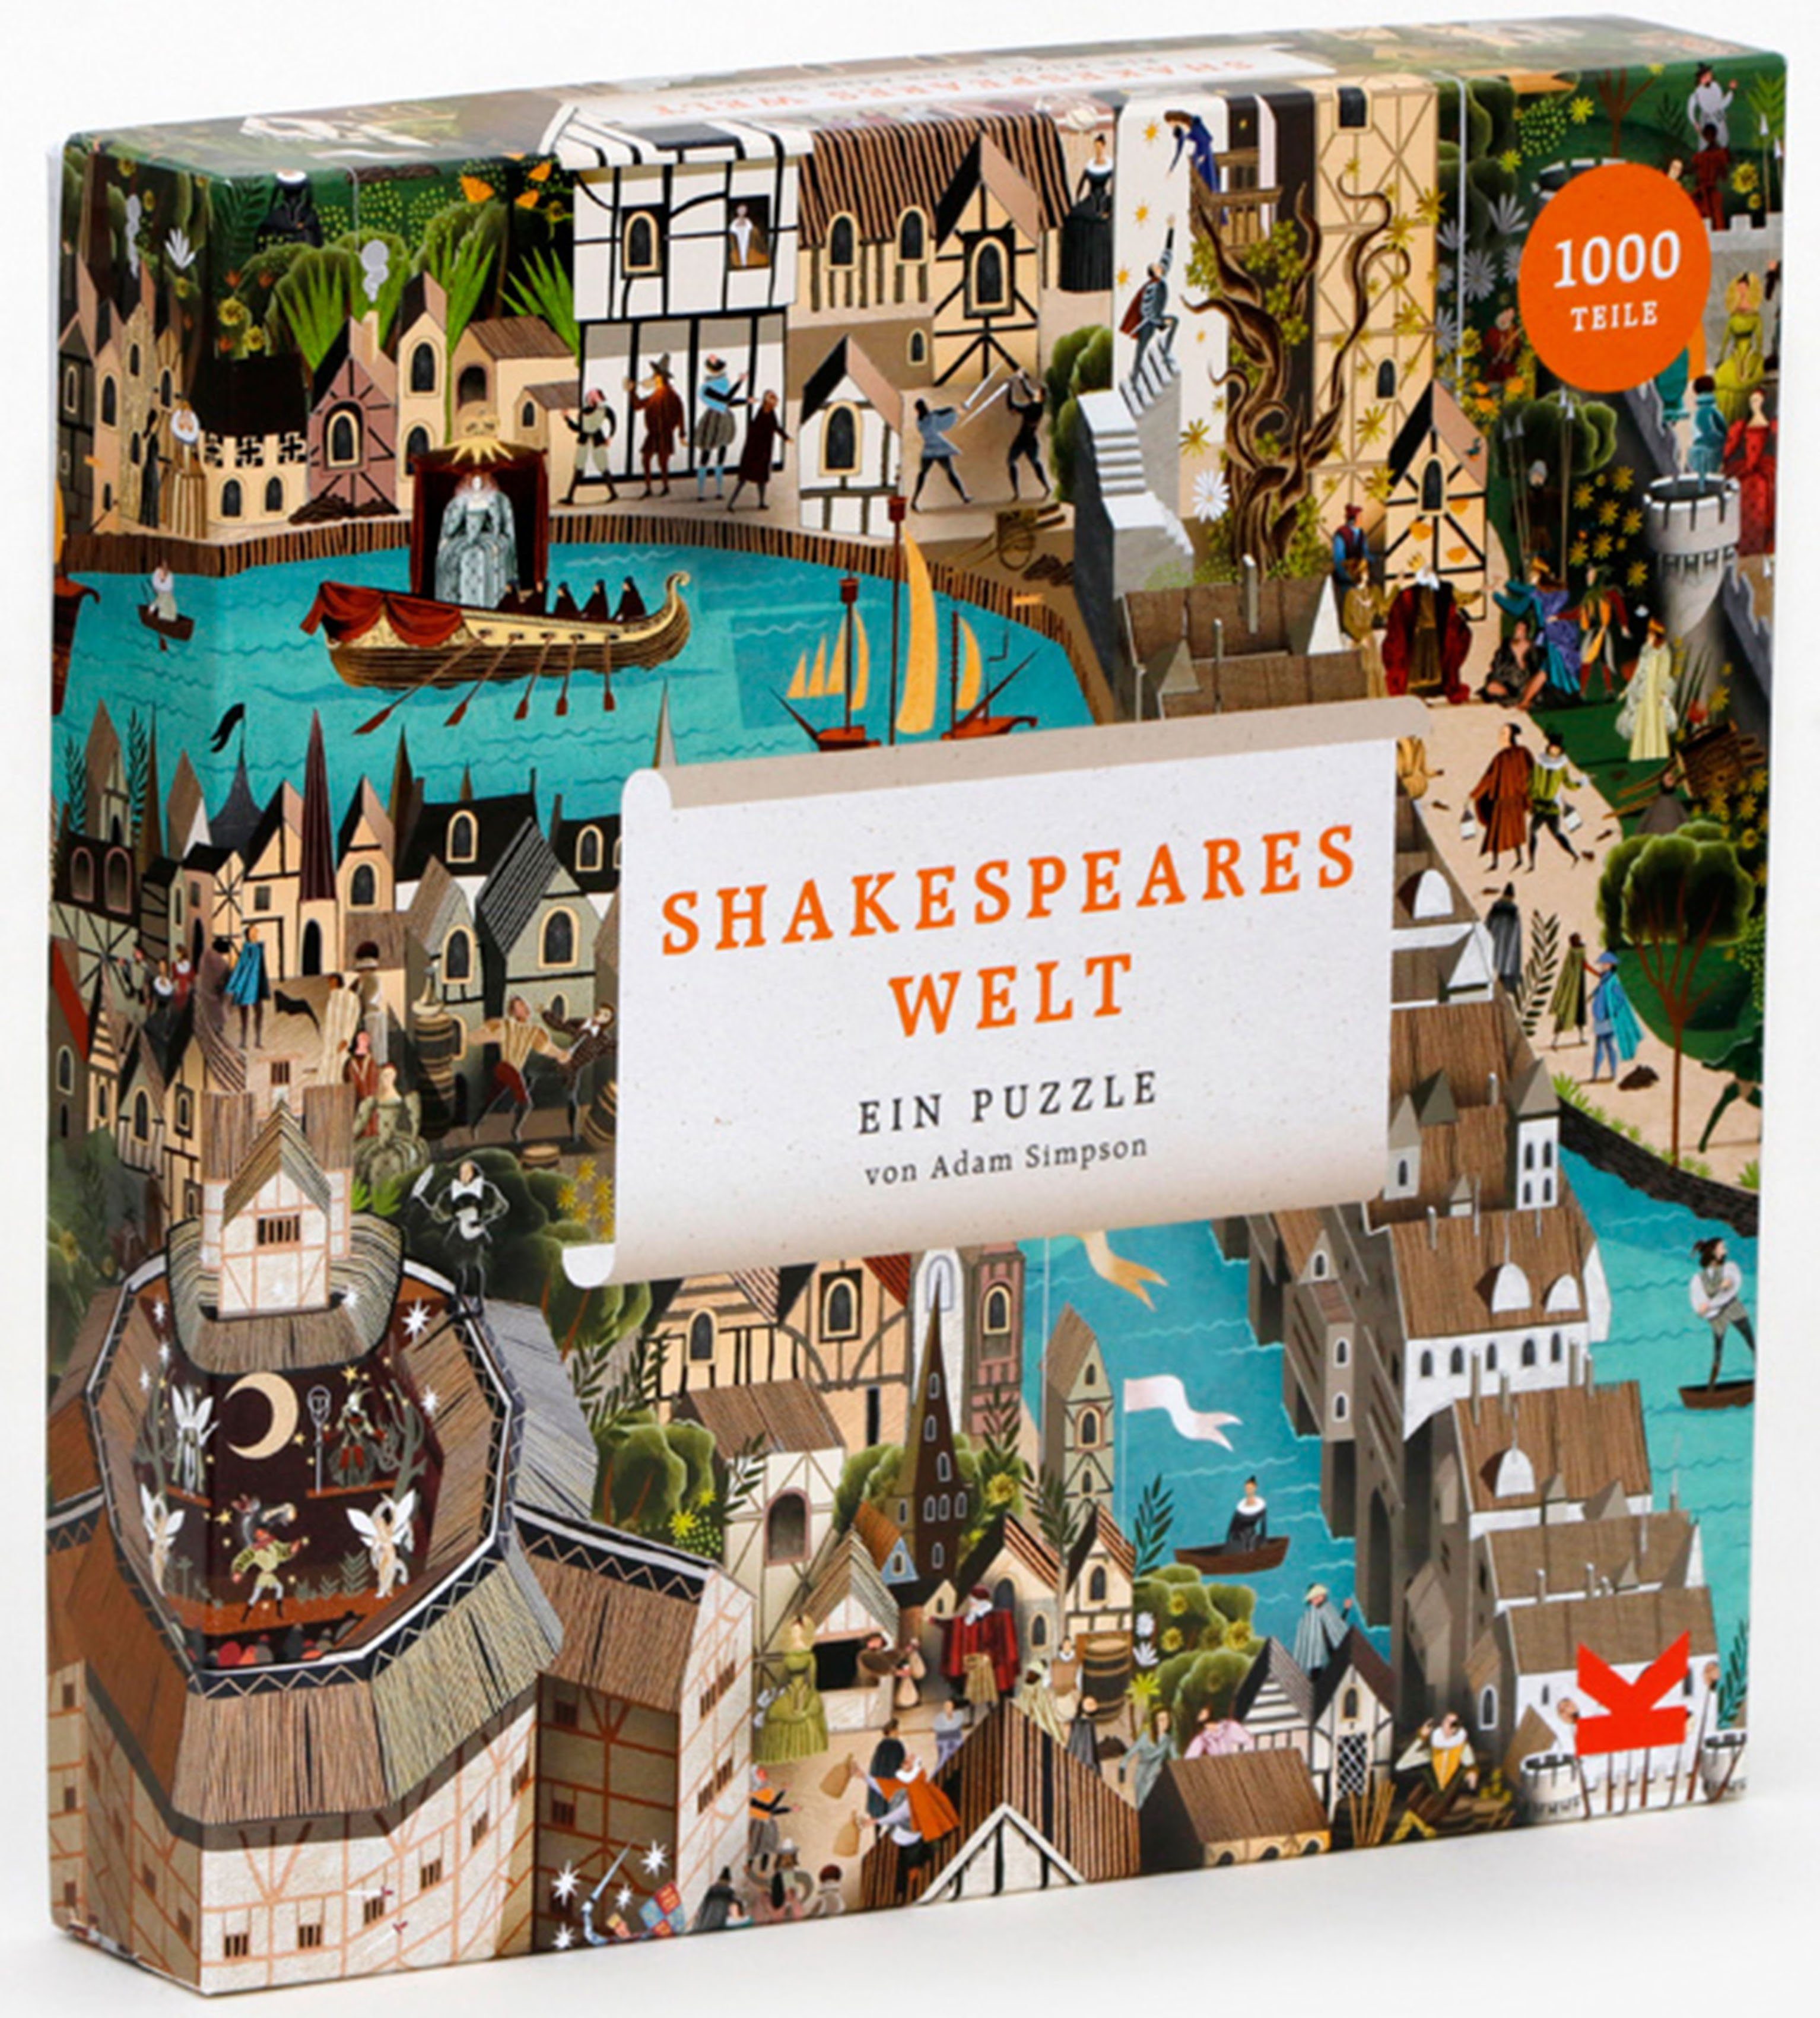 Laurence King 1000 Puzzleteile Shakespeares Welt, Puzzle